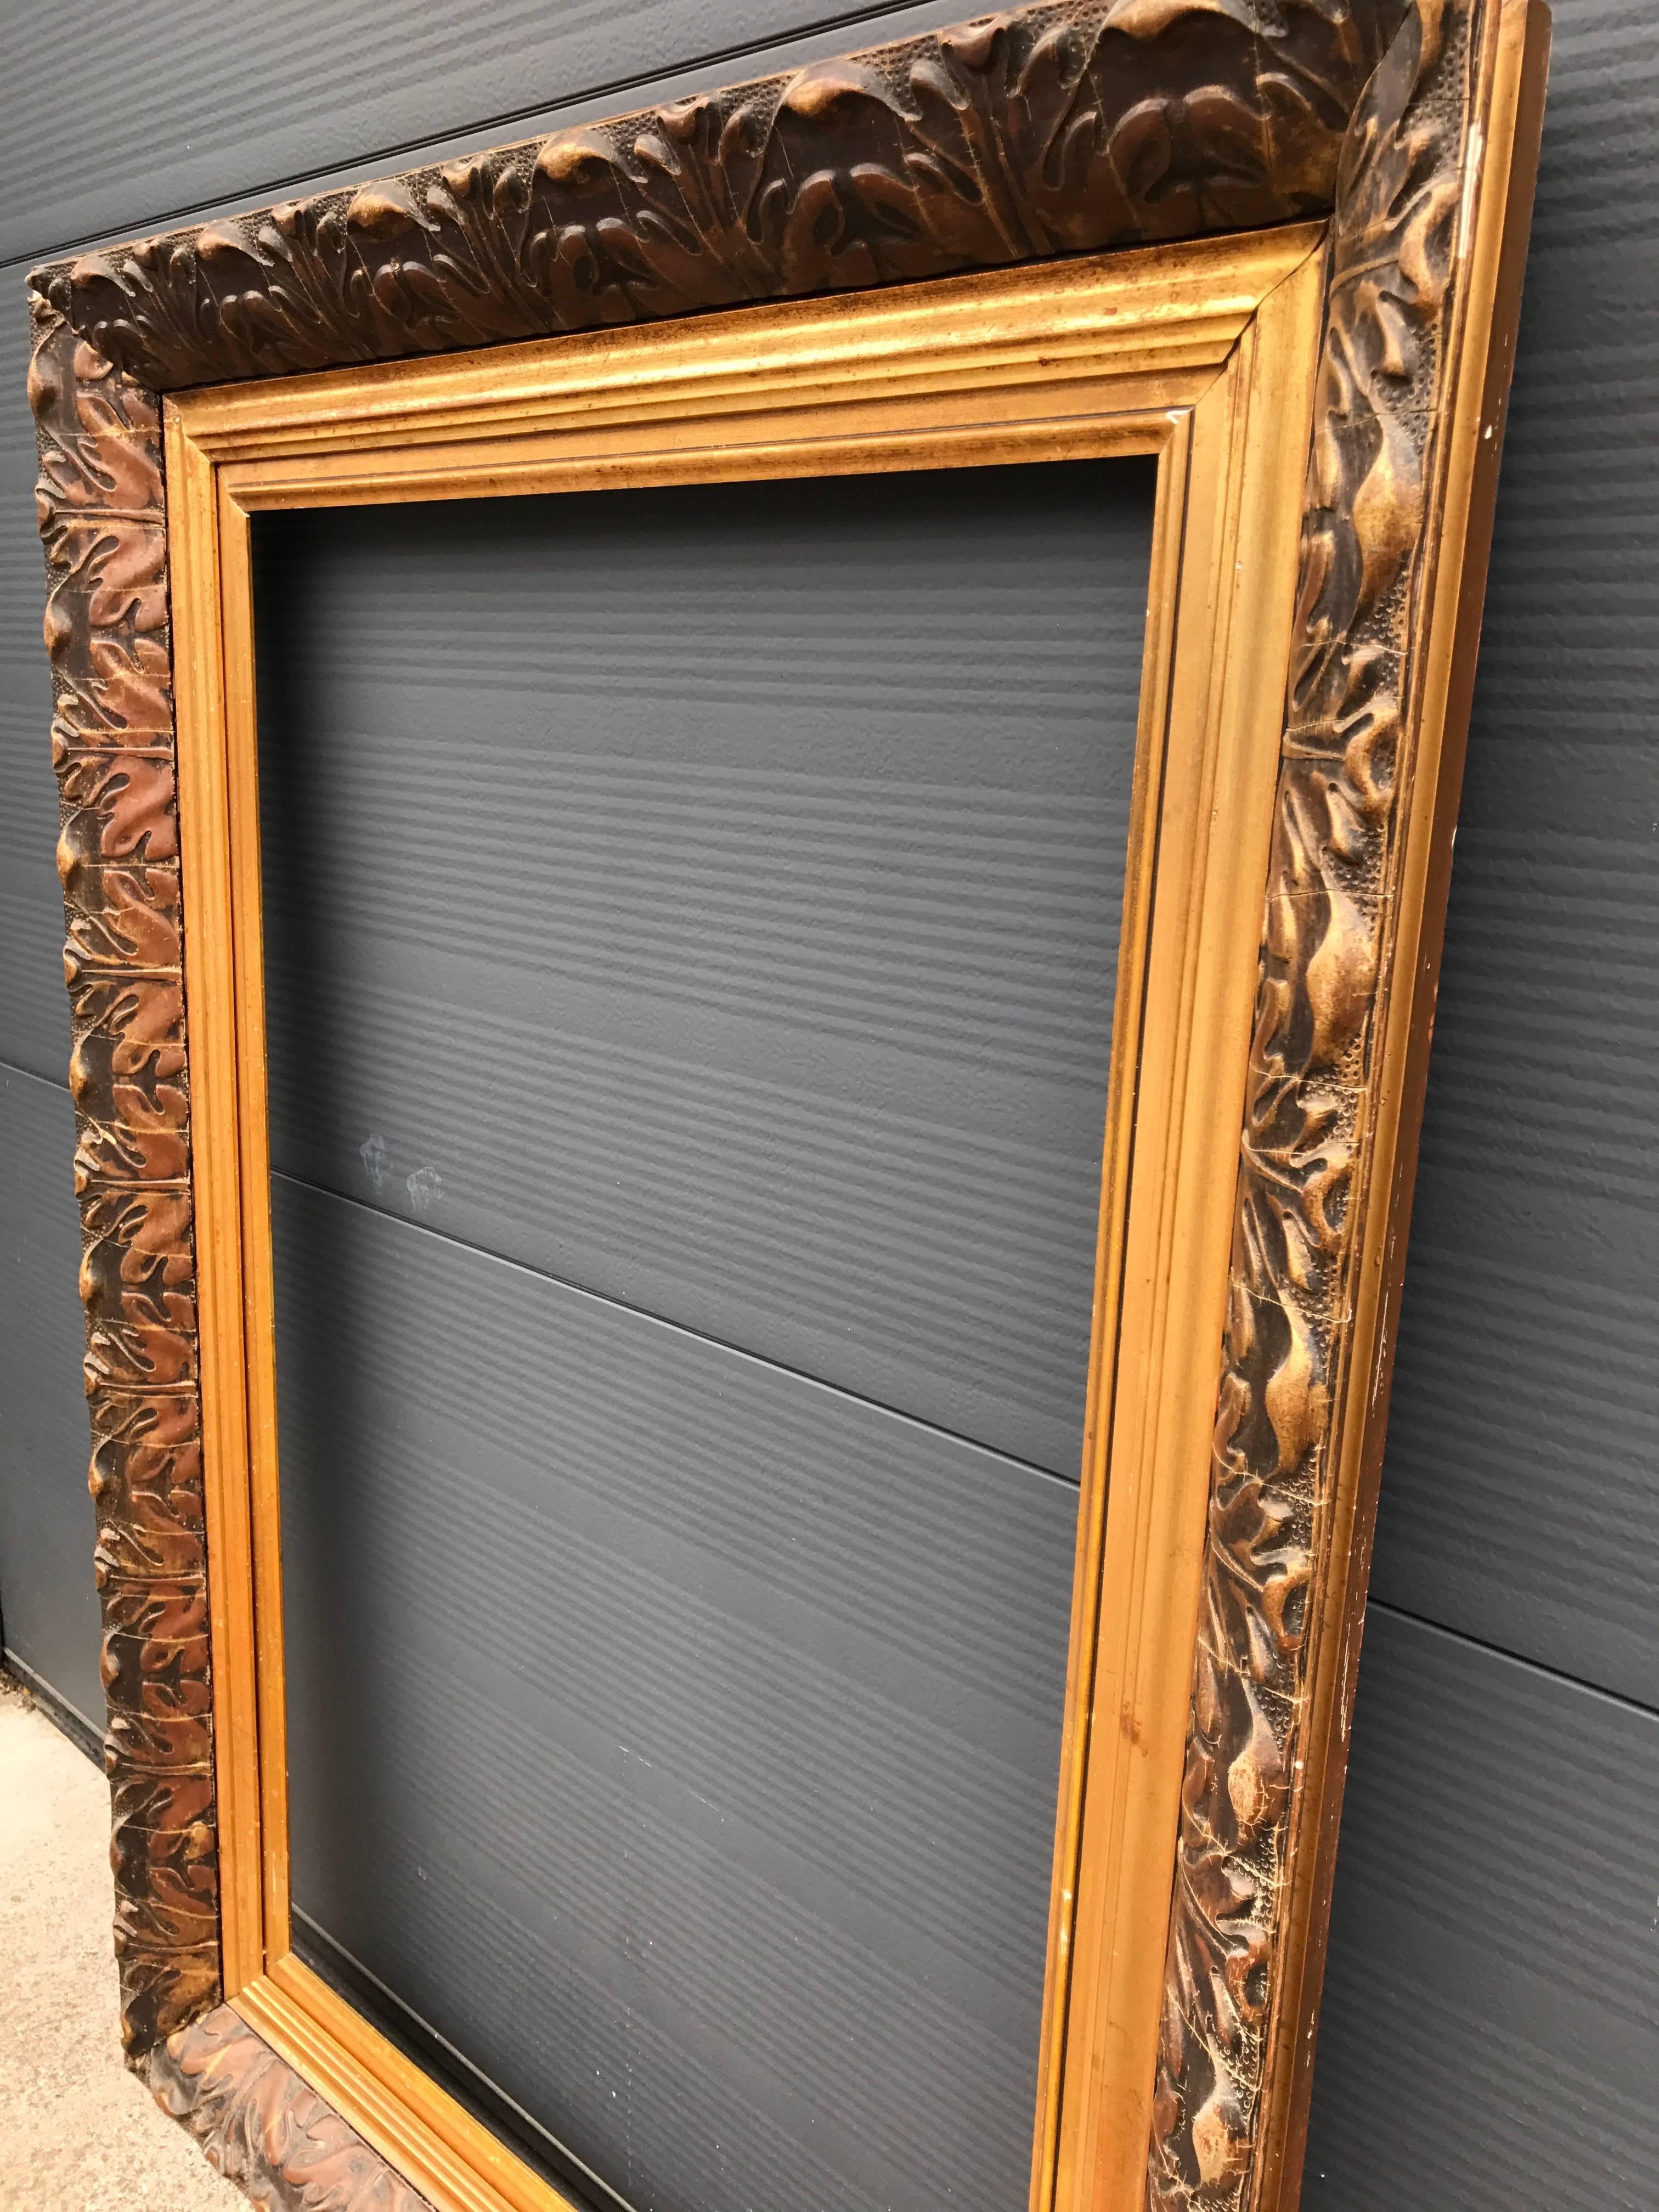 Large and Decorative Gilded Antique Painting or Mirror Frame with Leaf Motifs In Good Condition For Sale In Lisse, NL